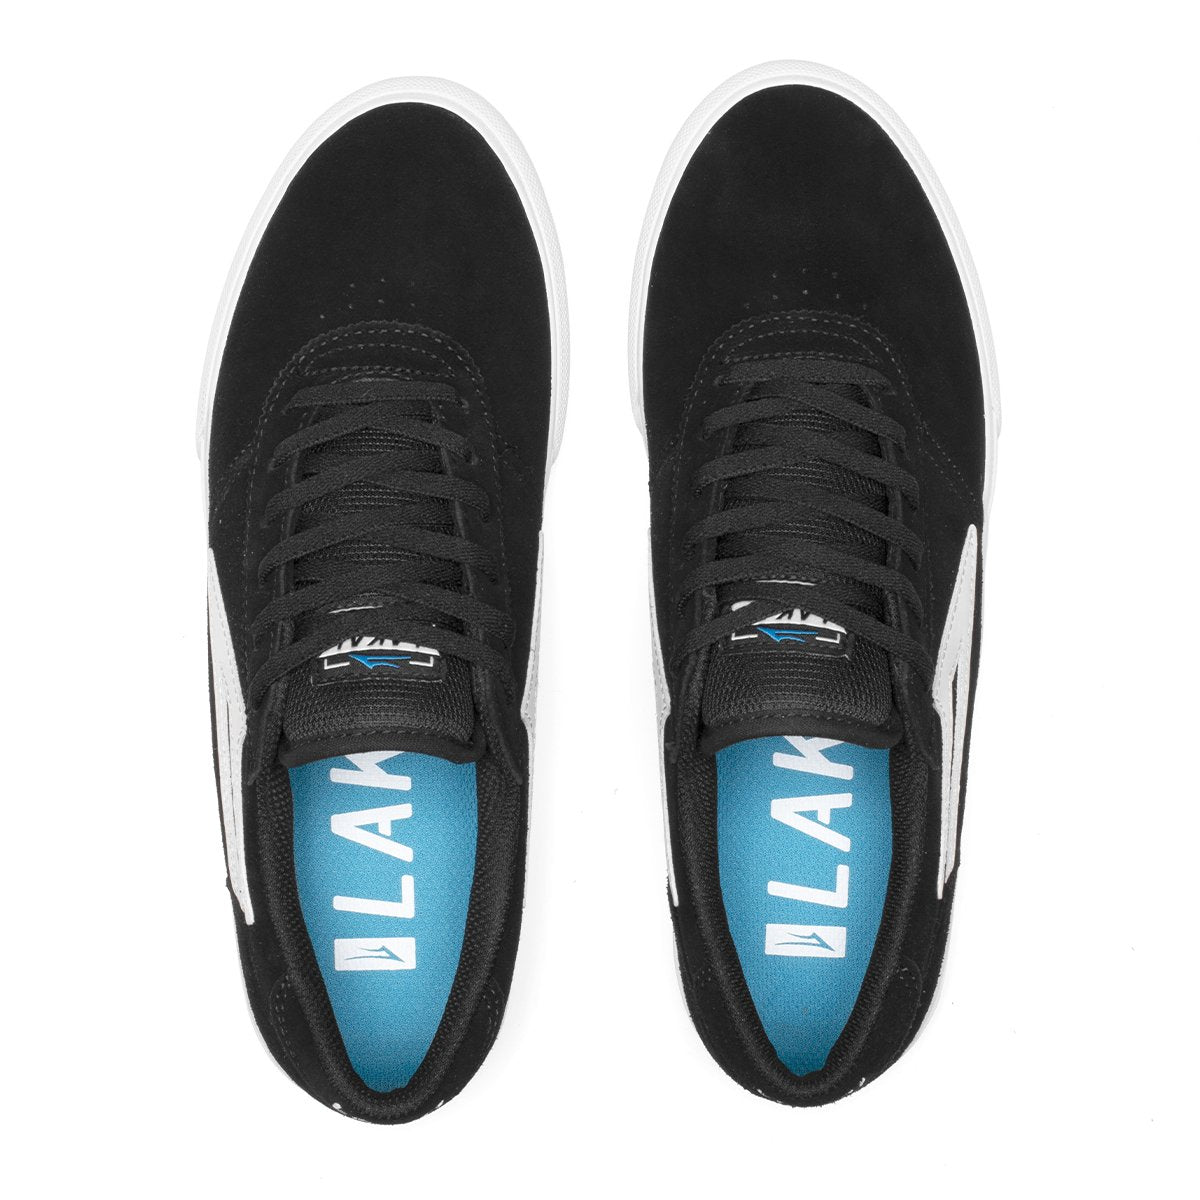 Black and white suede lowtop shoes from Lakai. Pay With Klarna and Clearpay.